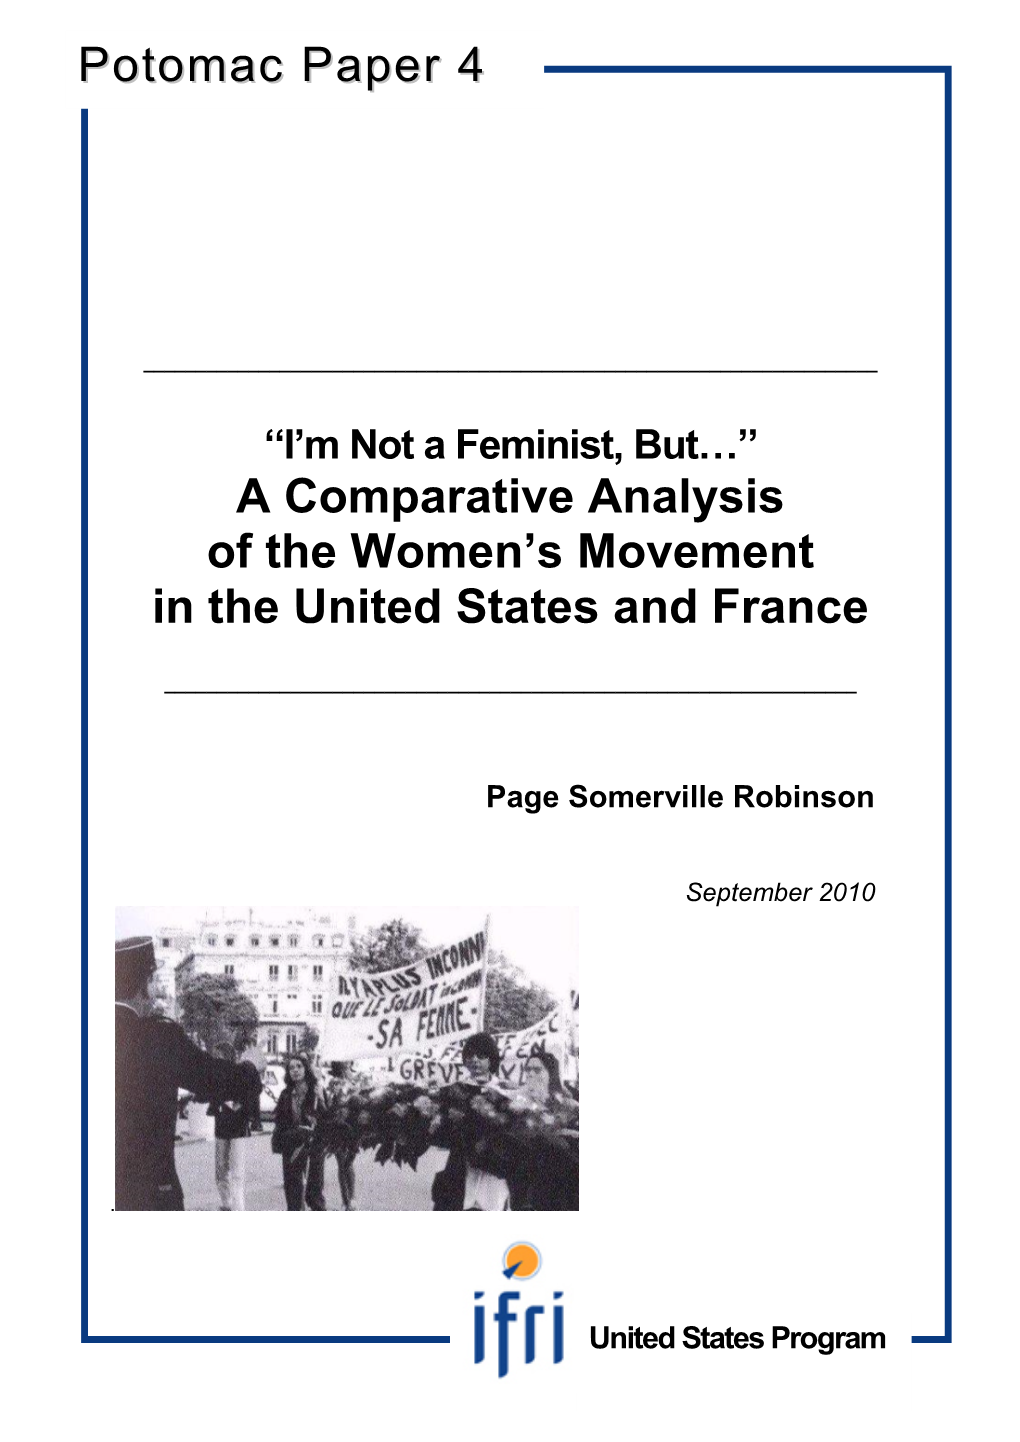 A Comparative Analysis of the Women's Movement in the United